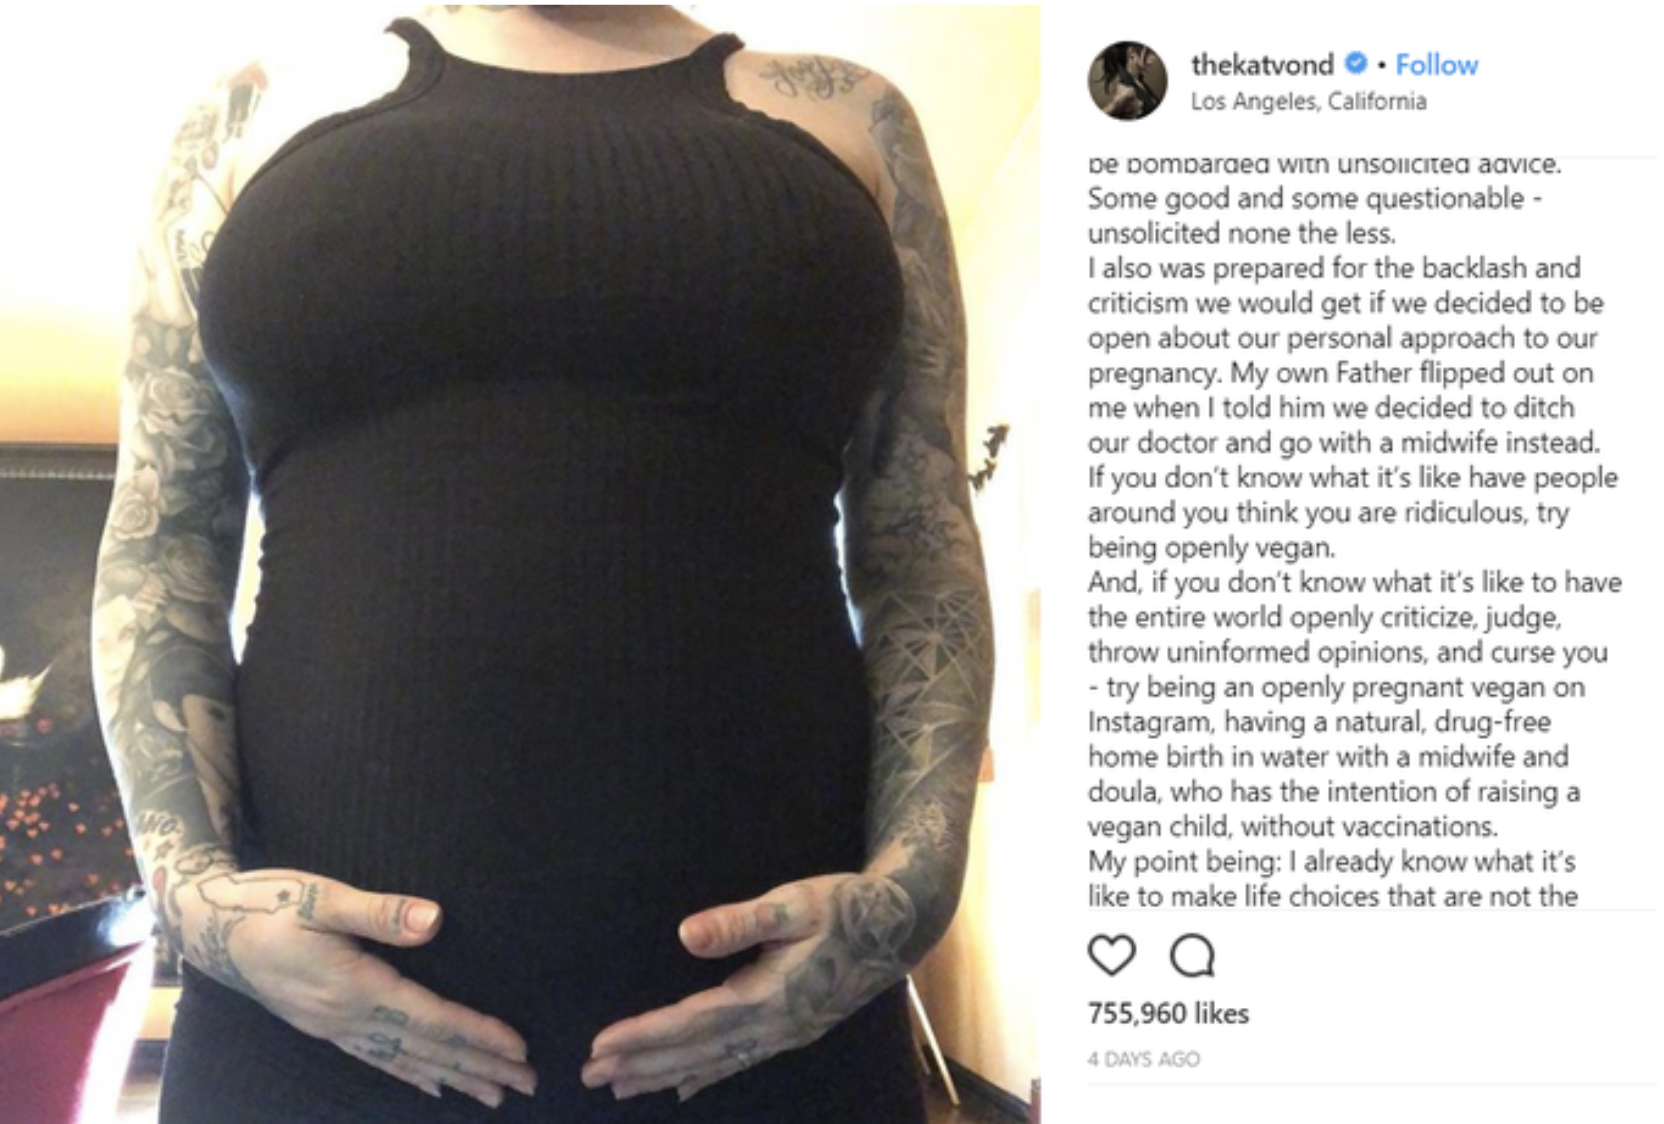 Picture of Kat&#x27;s Instagram post showing her baby bump and caption